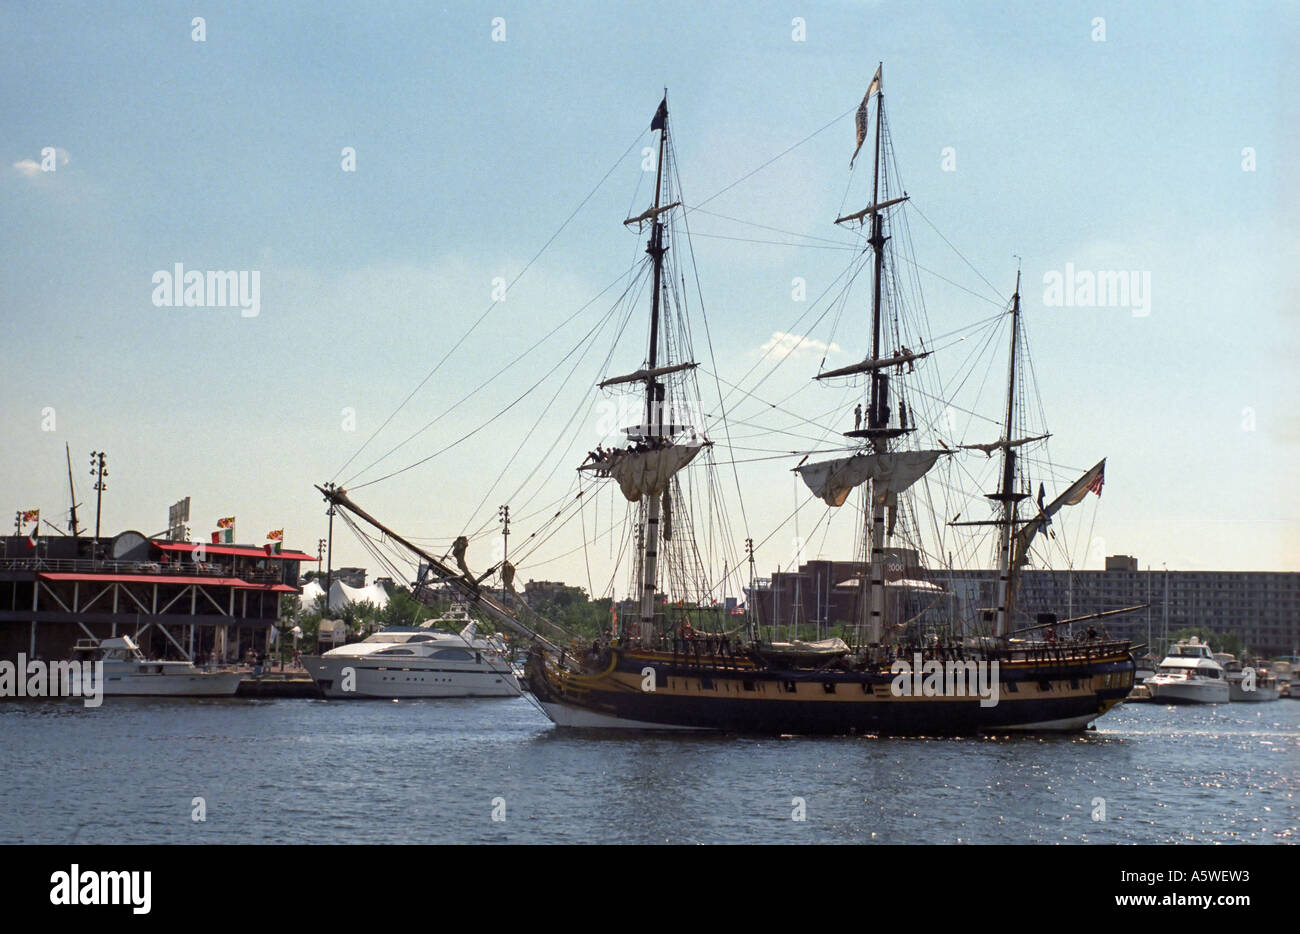 Tall ship in Baltimore Harbor, Md during Opsail Stock Photo